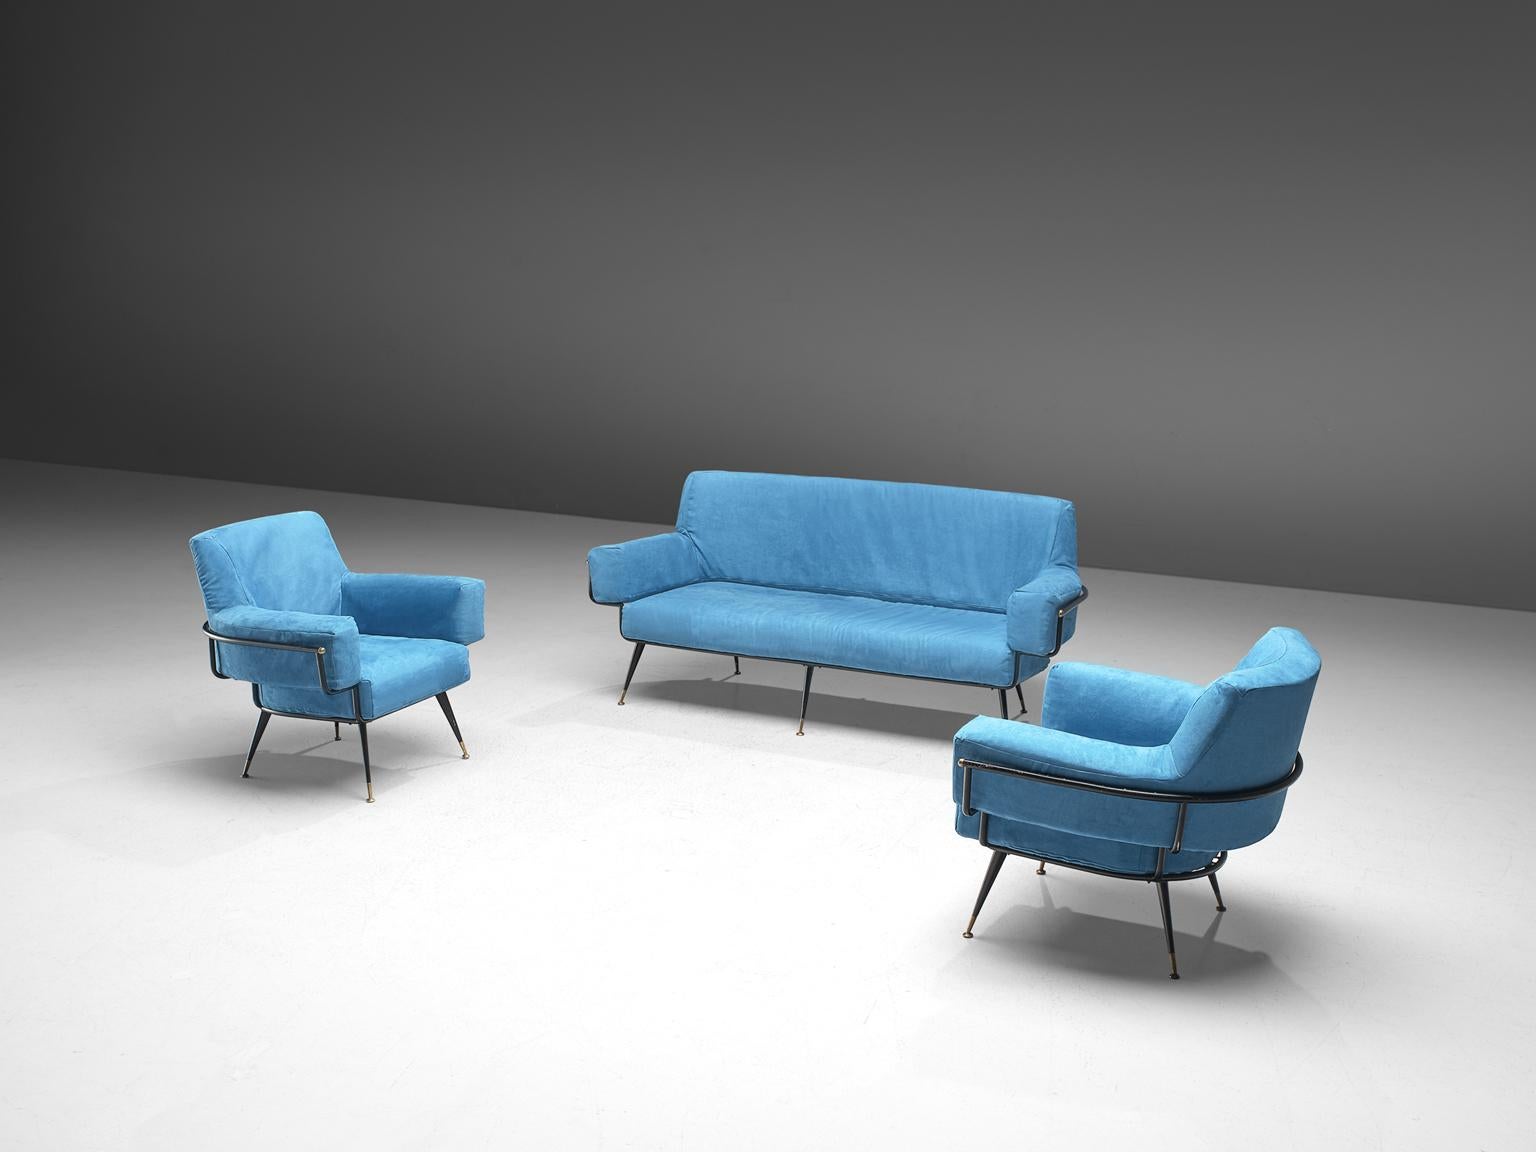 Valla Rito Sofa with Metal Frame in Azure Blue Upholstery 2